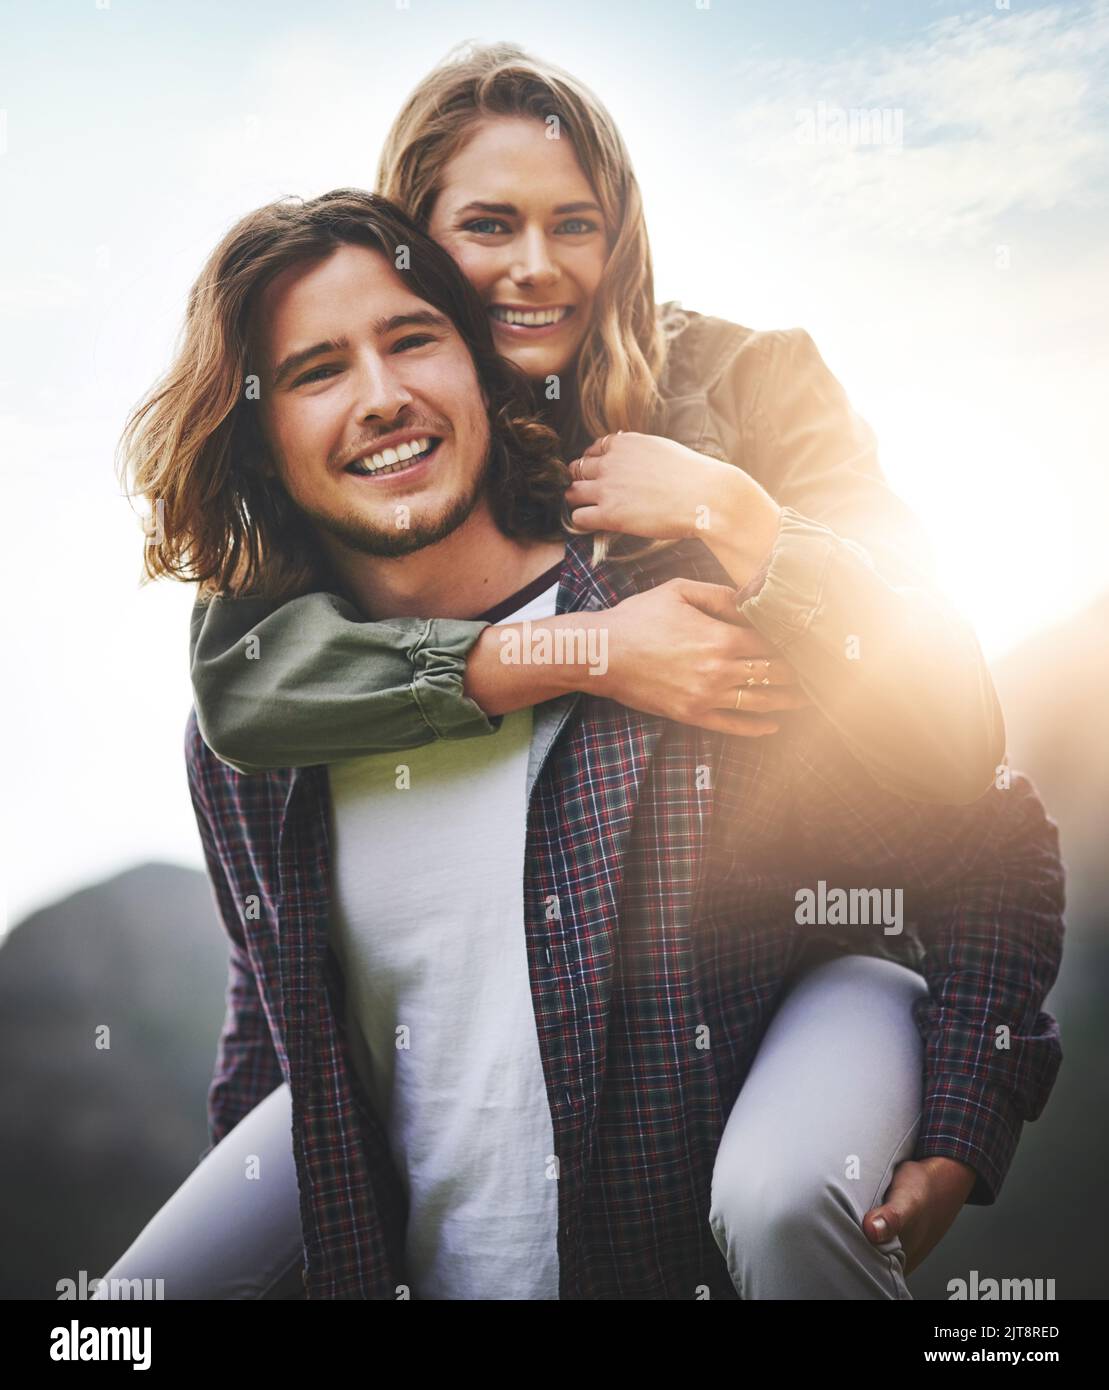 Life is for living. Portrait of a happy young couple having fun outside. Stock Photo